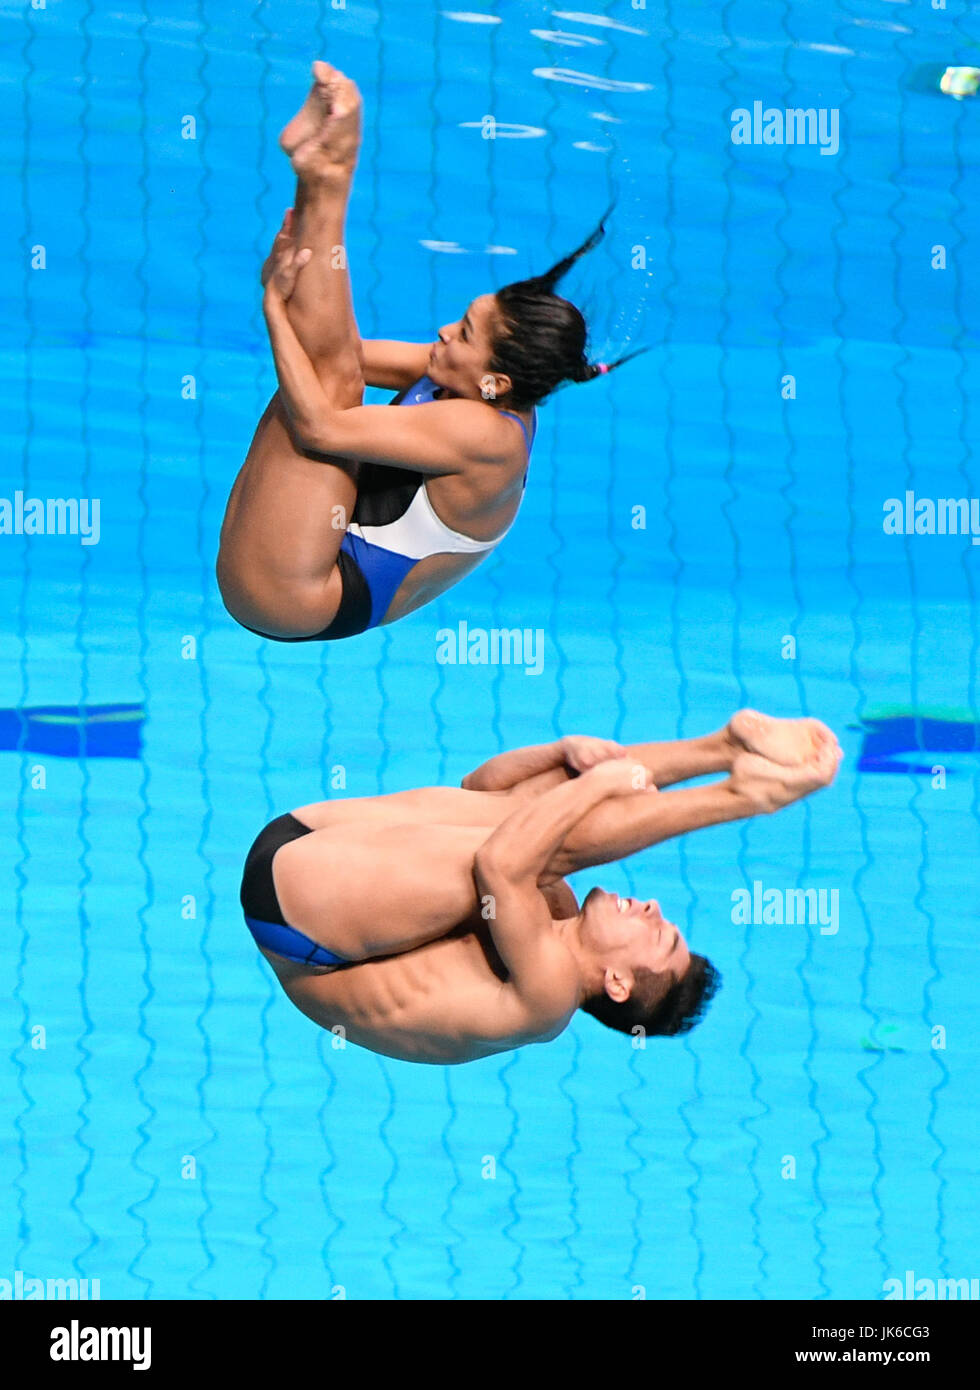 Budapest, Hungary. 22nd July, 2017. Mexico's Julian Sanchez and Arantxa Chavez Munoz in action during the 3m springboard synchro mixed of the FINA World Championships 2017 in Budapest, Hungary, 22 July 2017. Photo: Axel Heimken/dpa/Alamy Live News Stock Photo